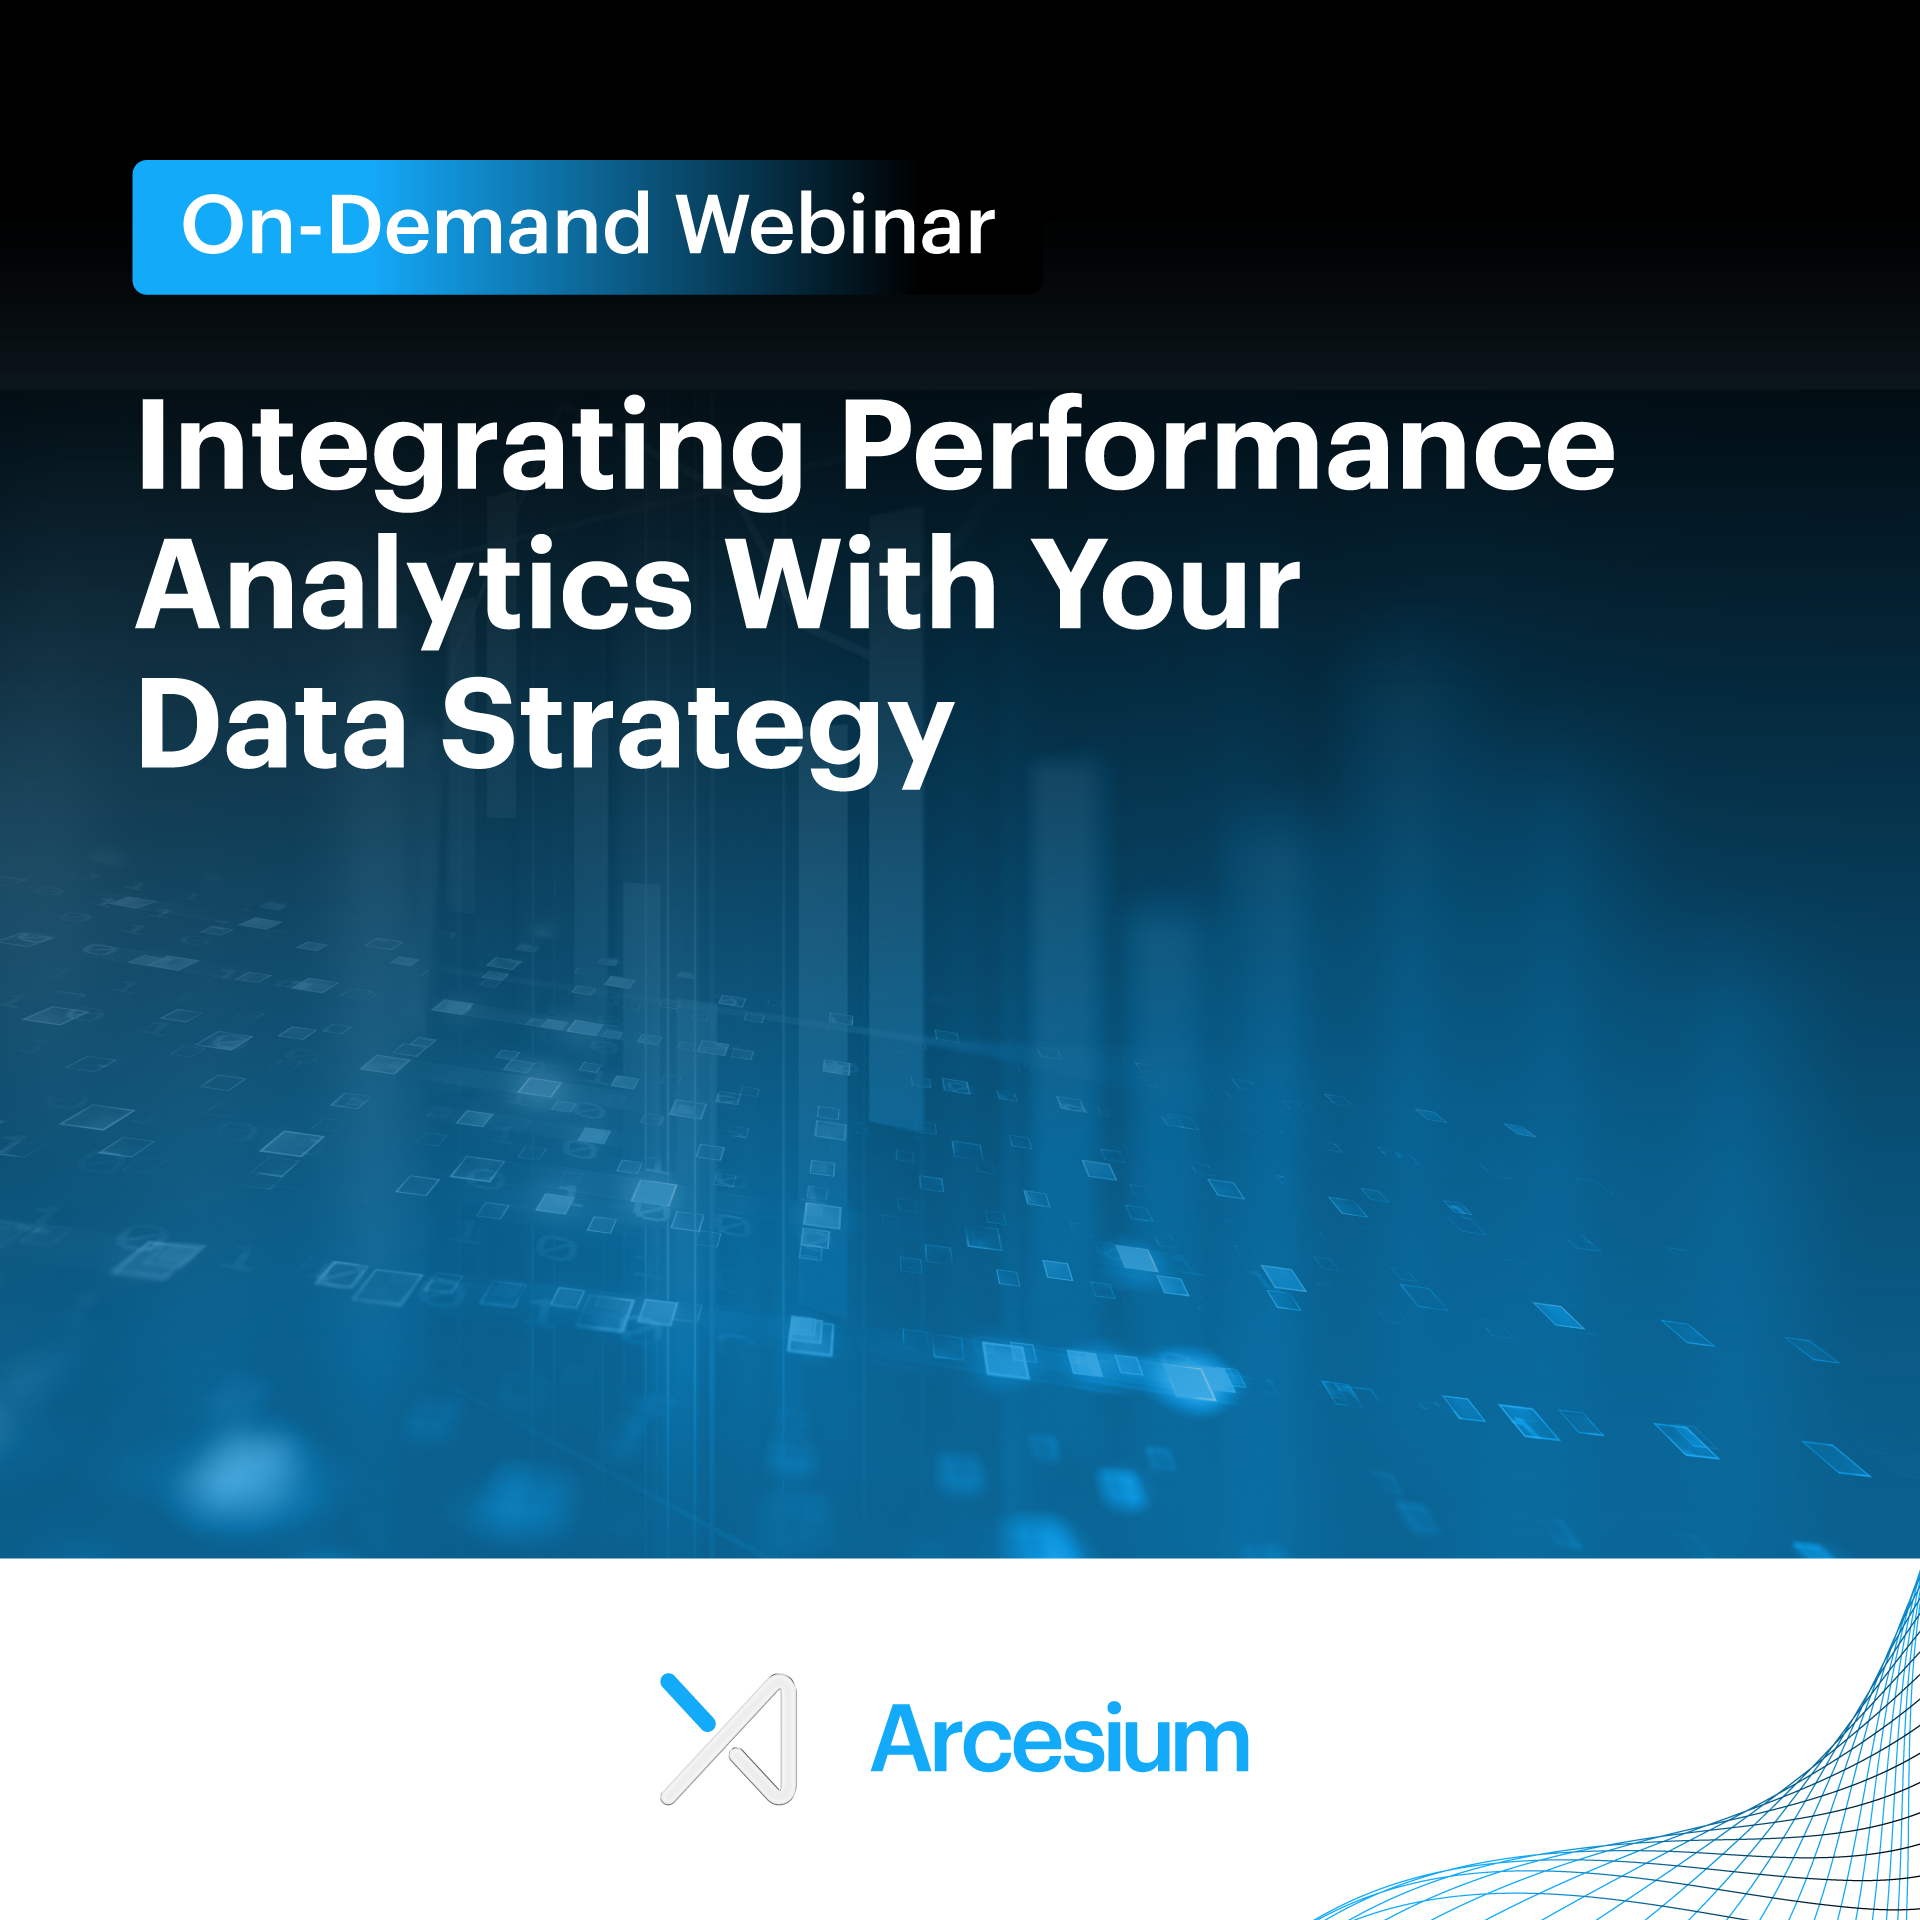 Integrating Performance Analytics With Your Data Strategy